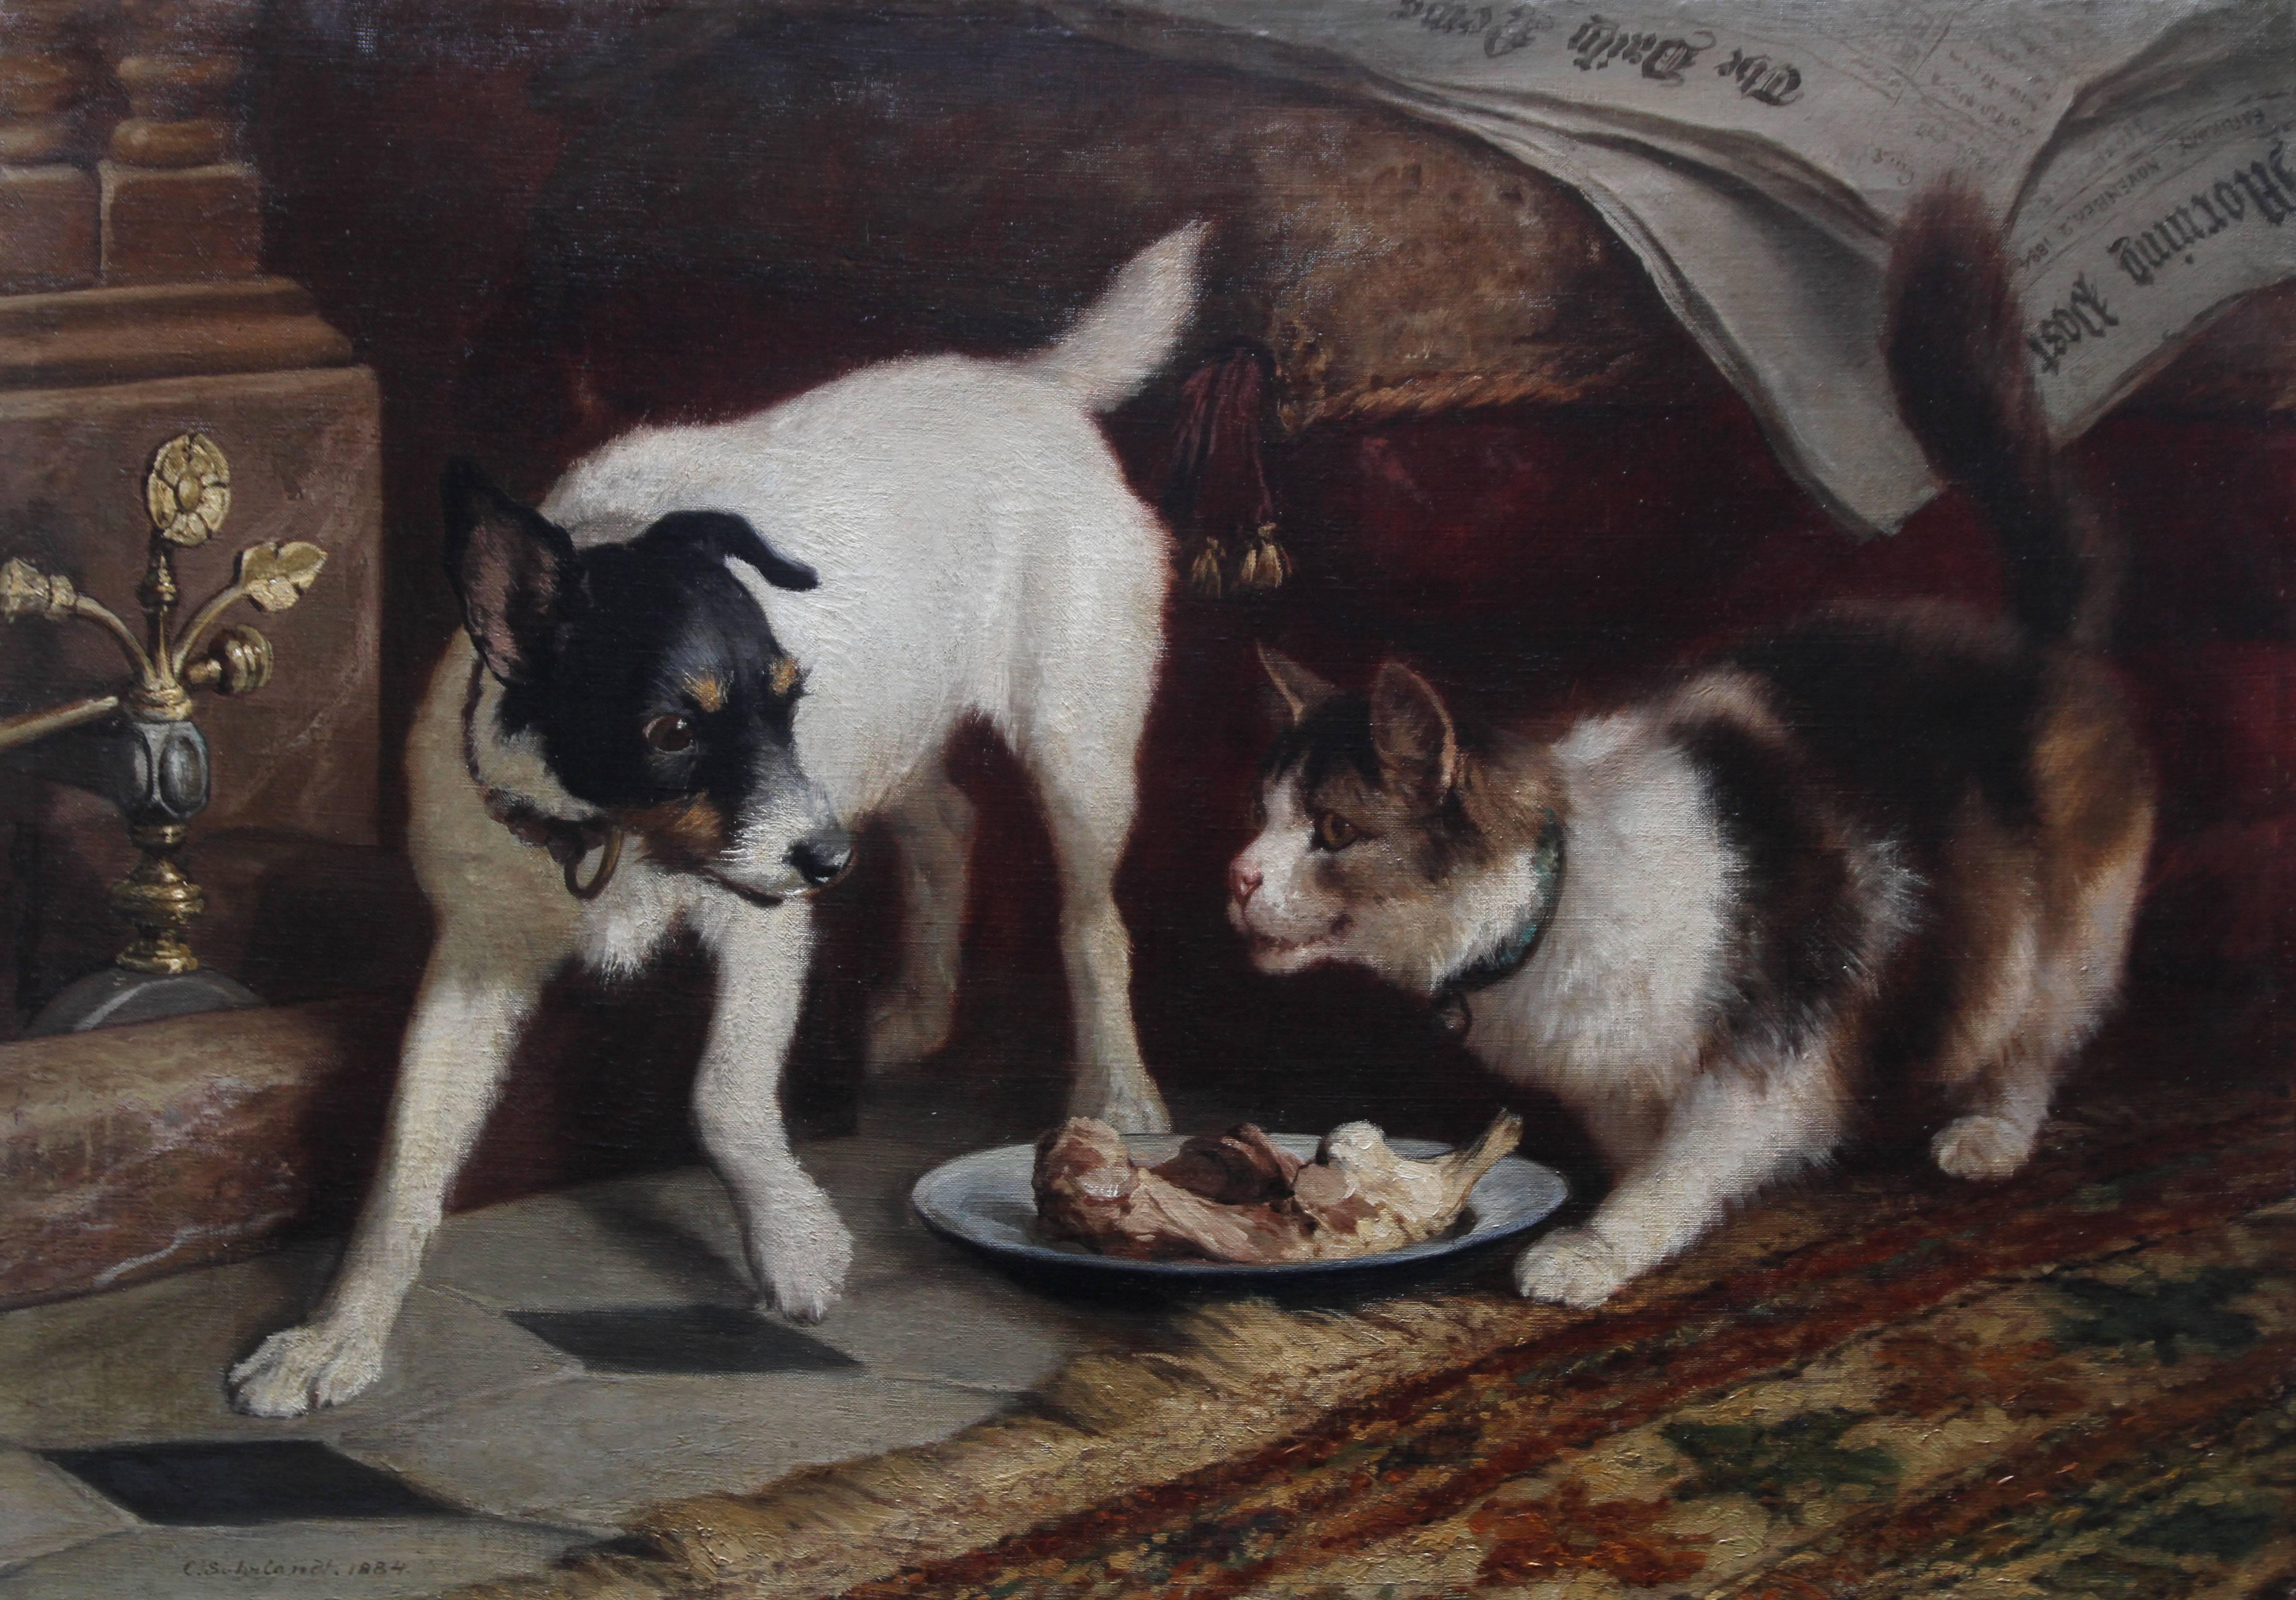 Portrait of a Cat and Dog - Victorian genre 1884 animal art oil painting - Painting by Carl Suhrlandt